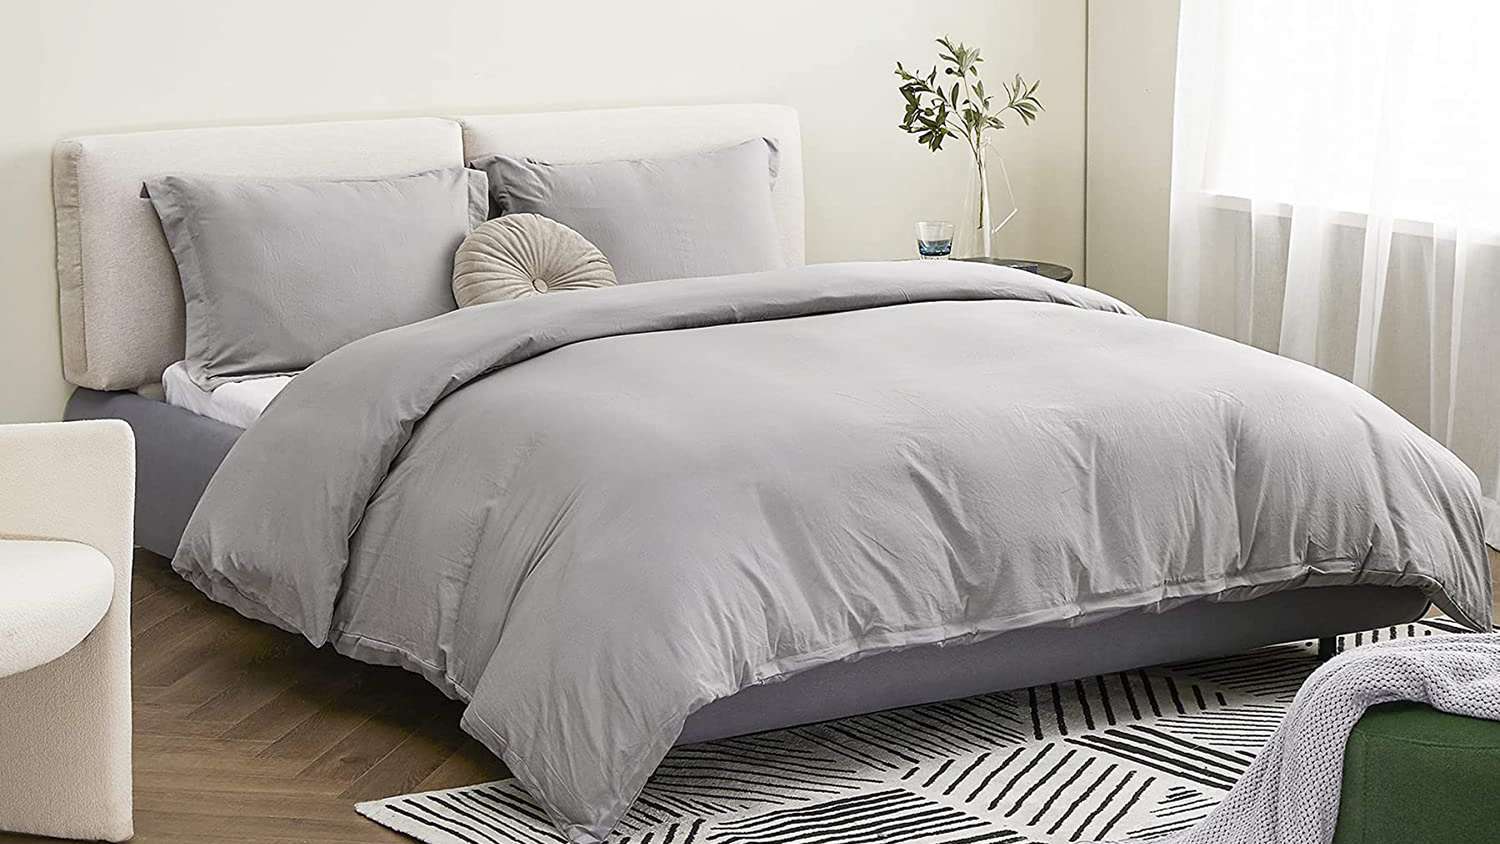 The 16 Best Duvet Covers You Can, Duvet Covers For Queen Size Beds